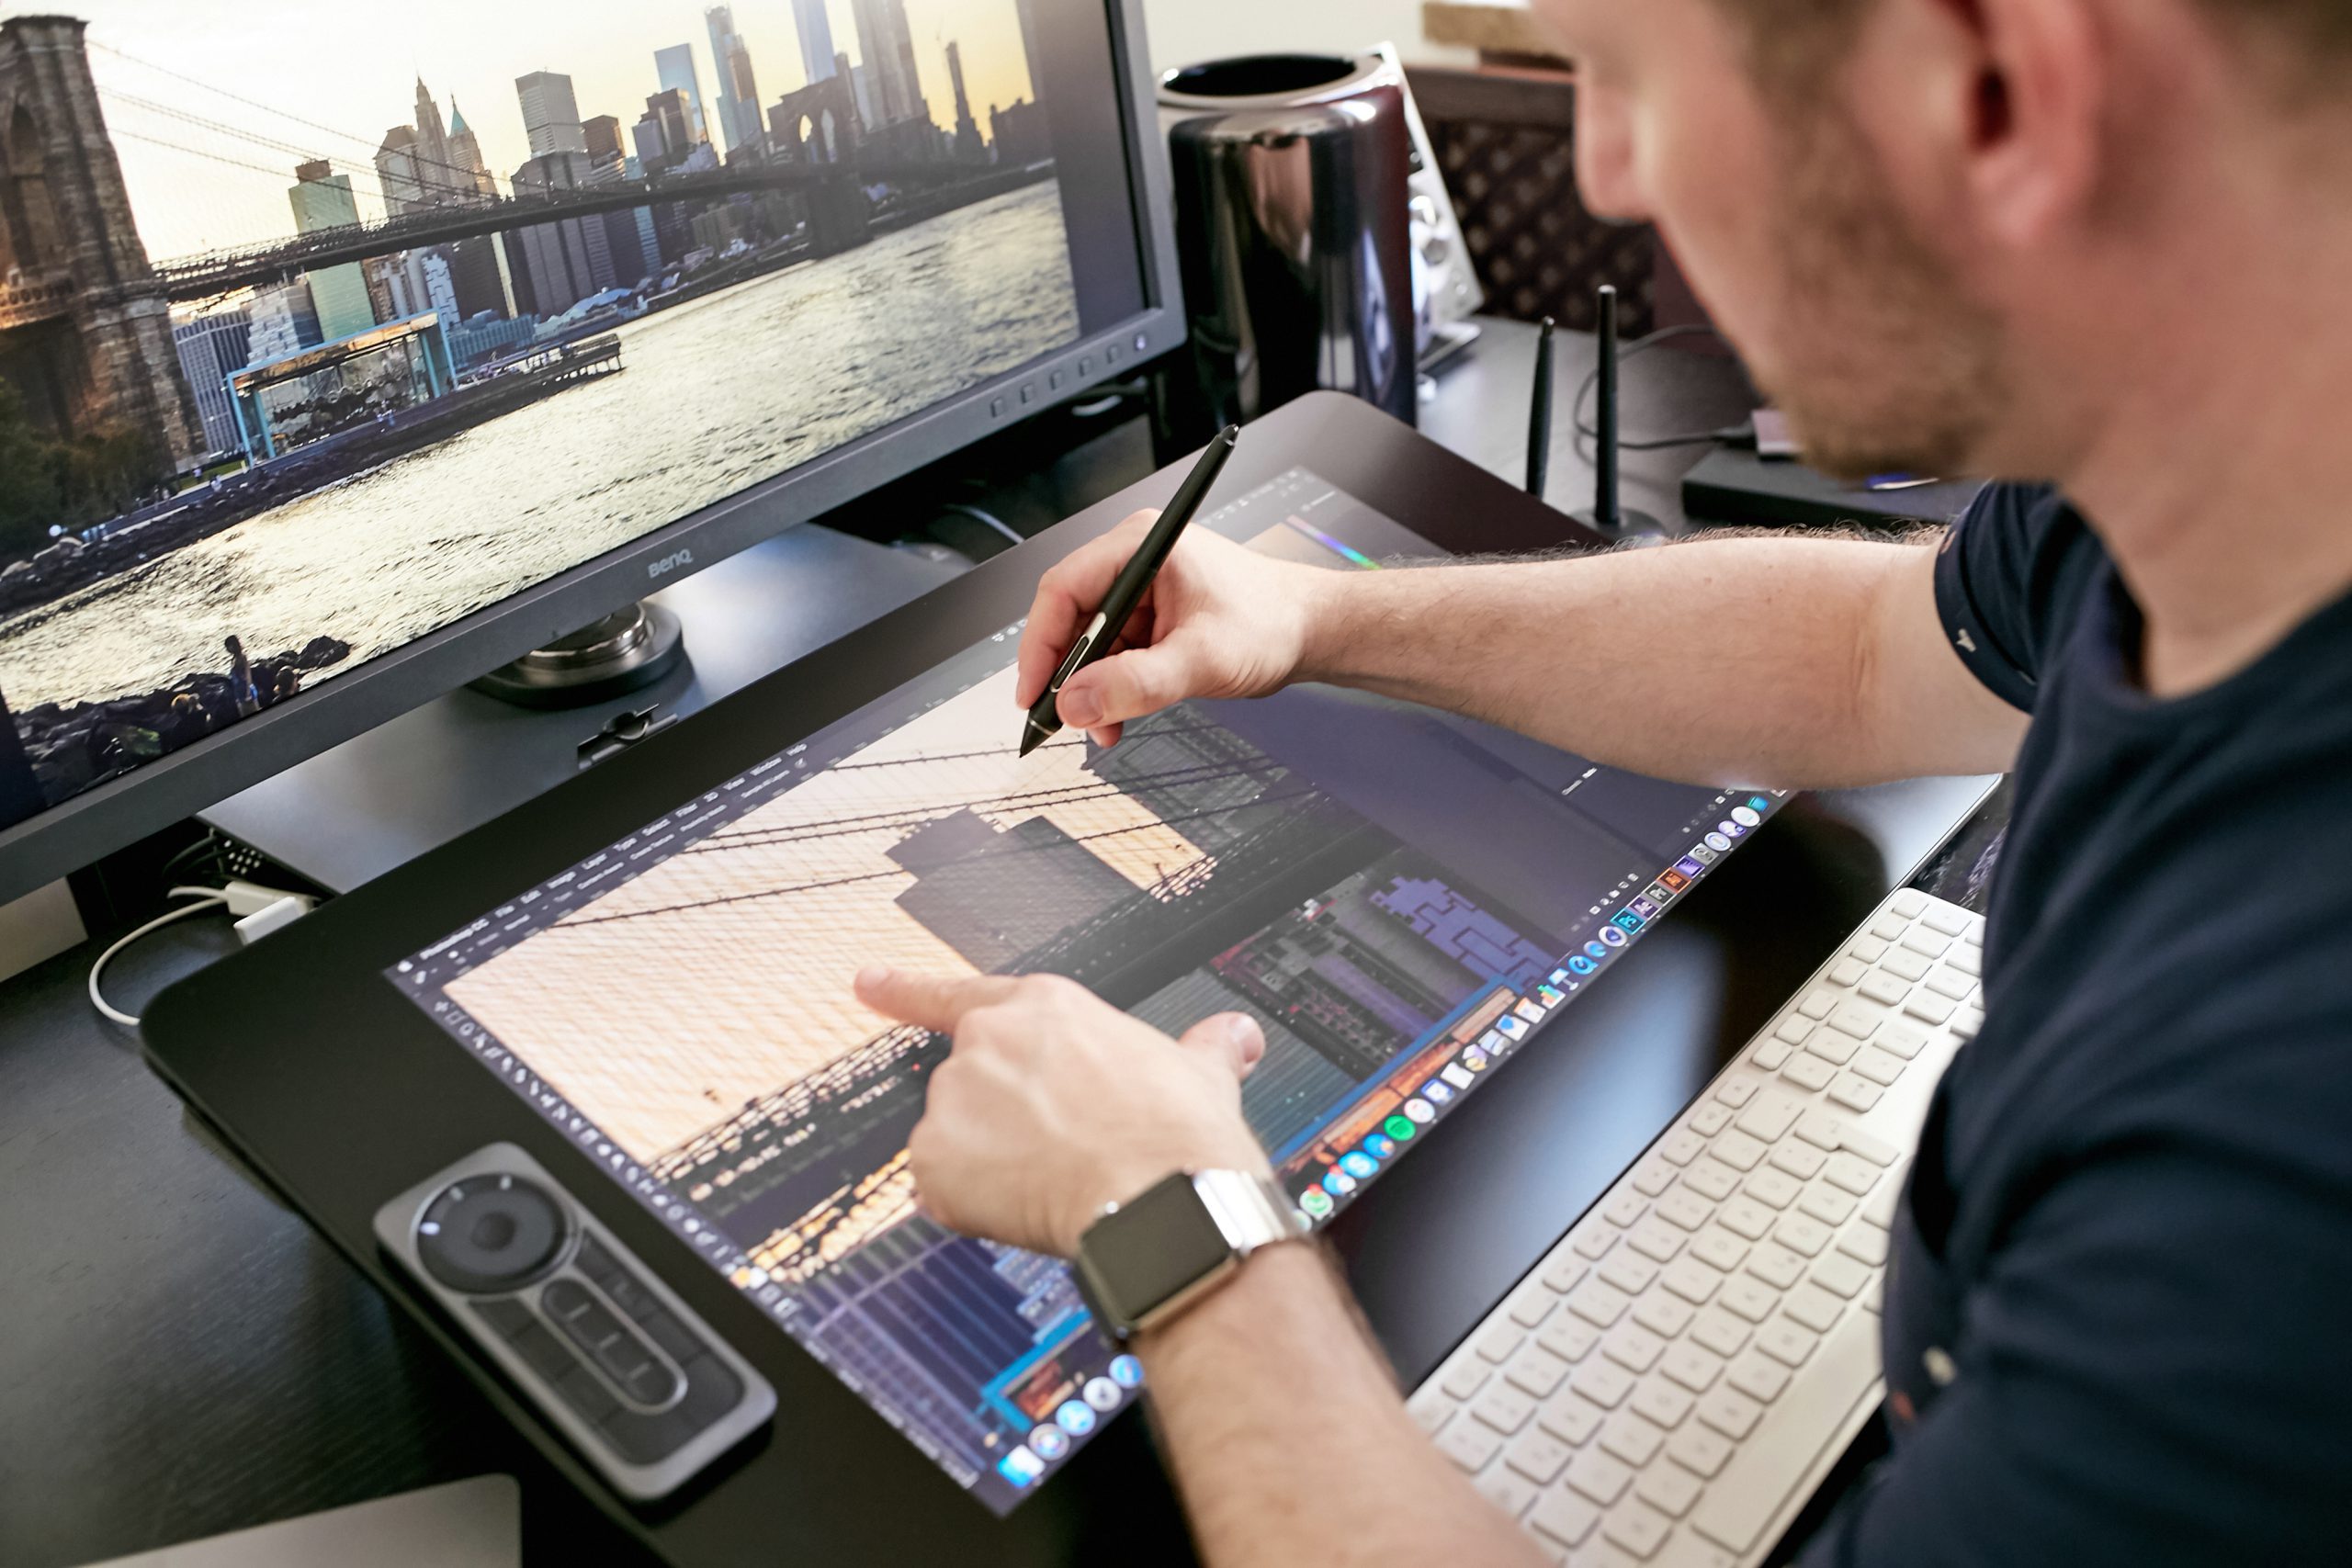 Wacom Partnerships – Working From Home Content